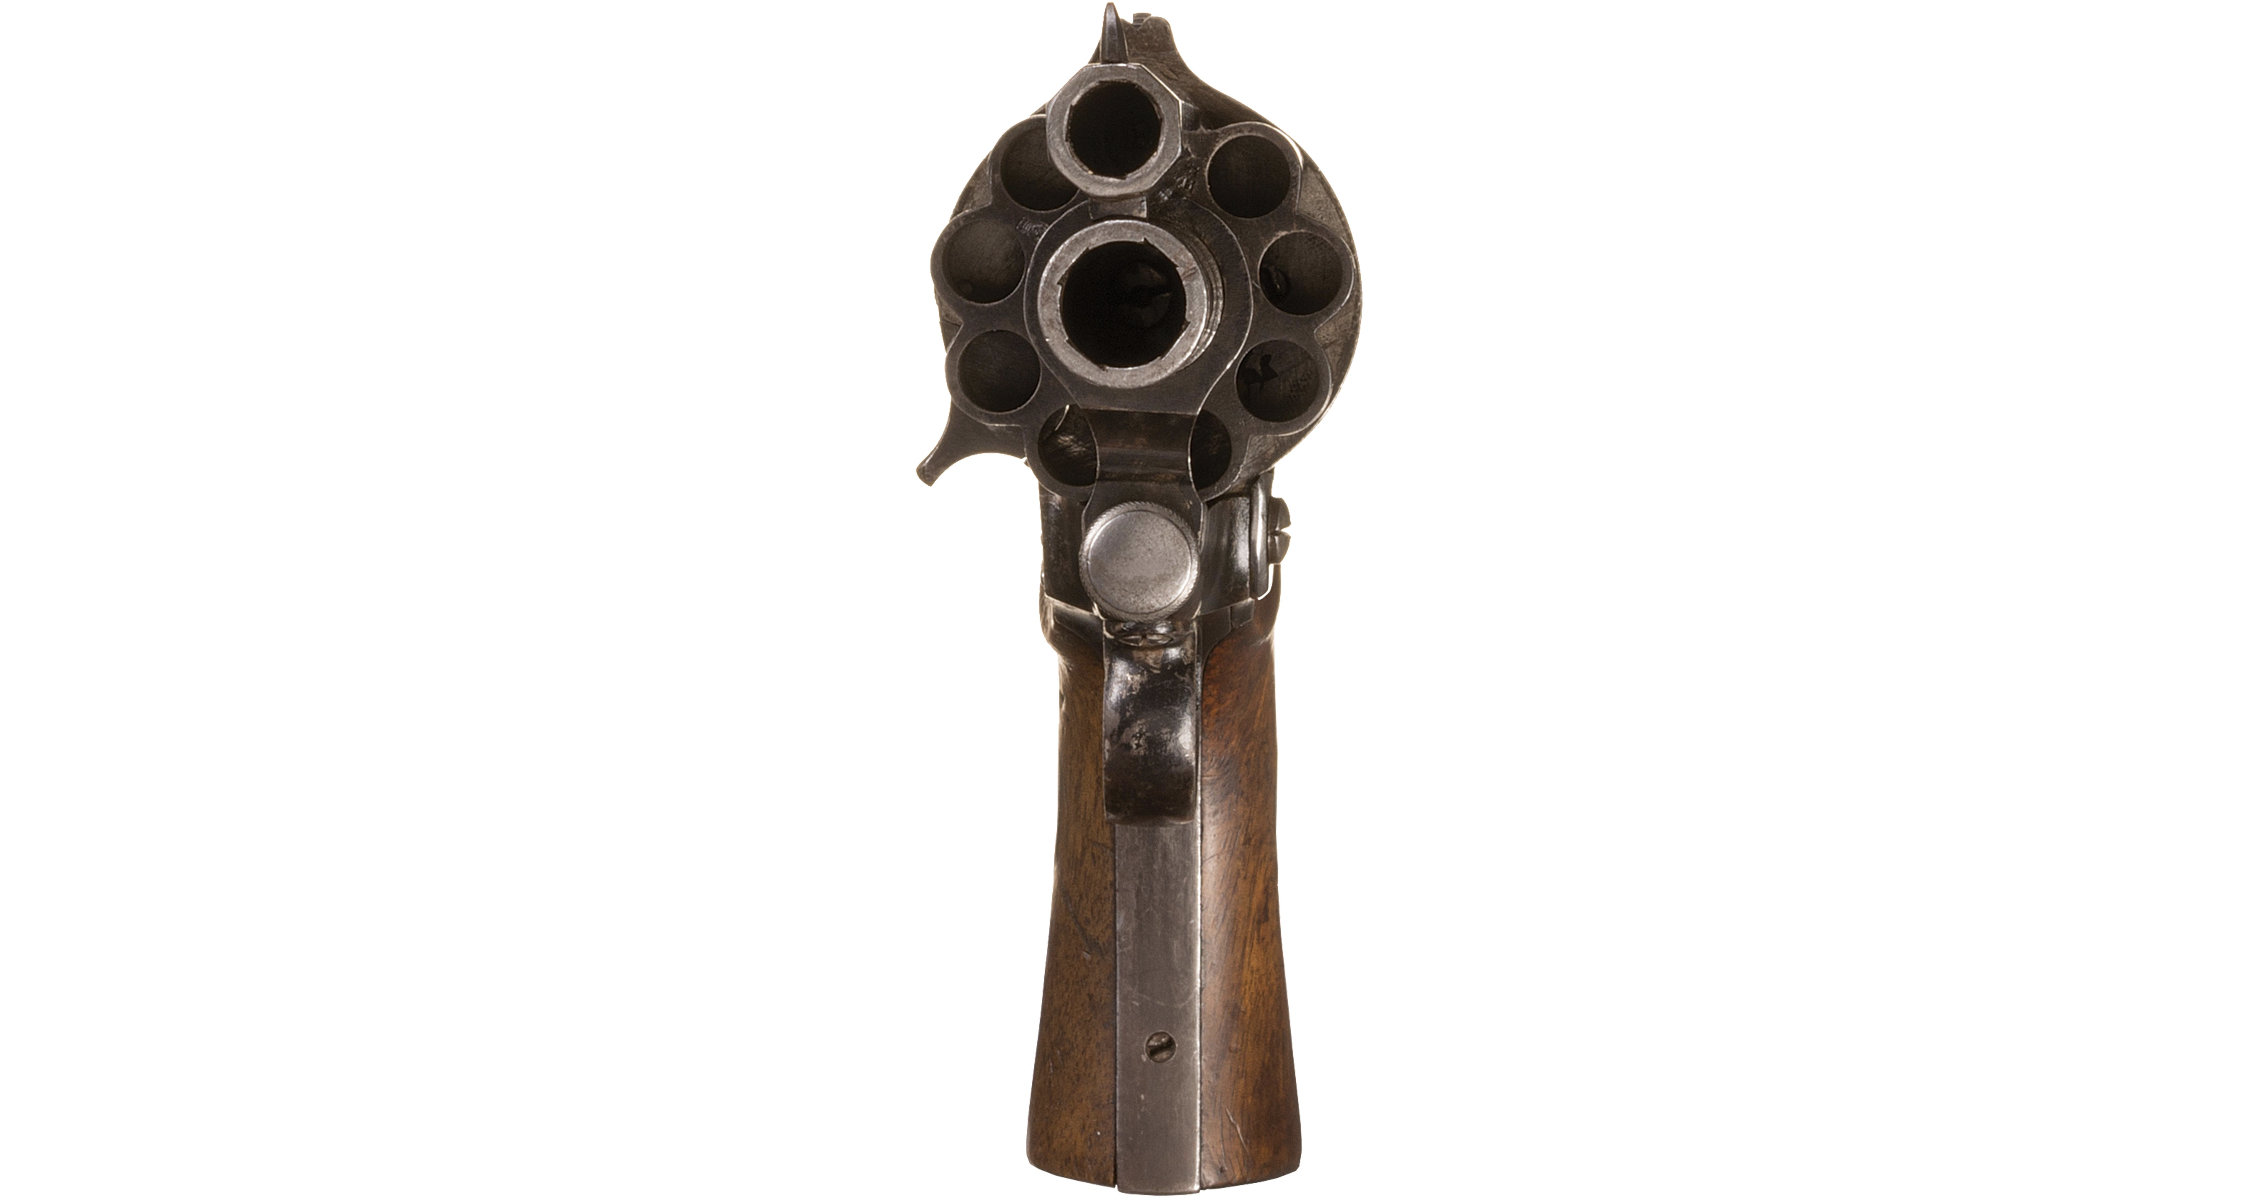 The Double-Barreled LeMat Revolver